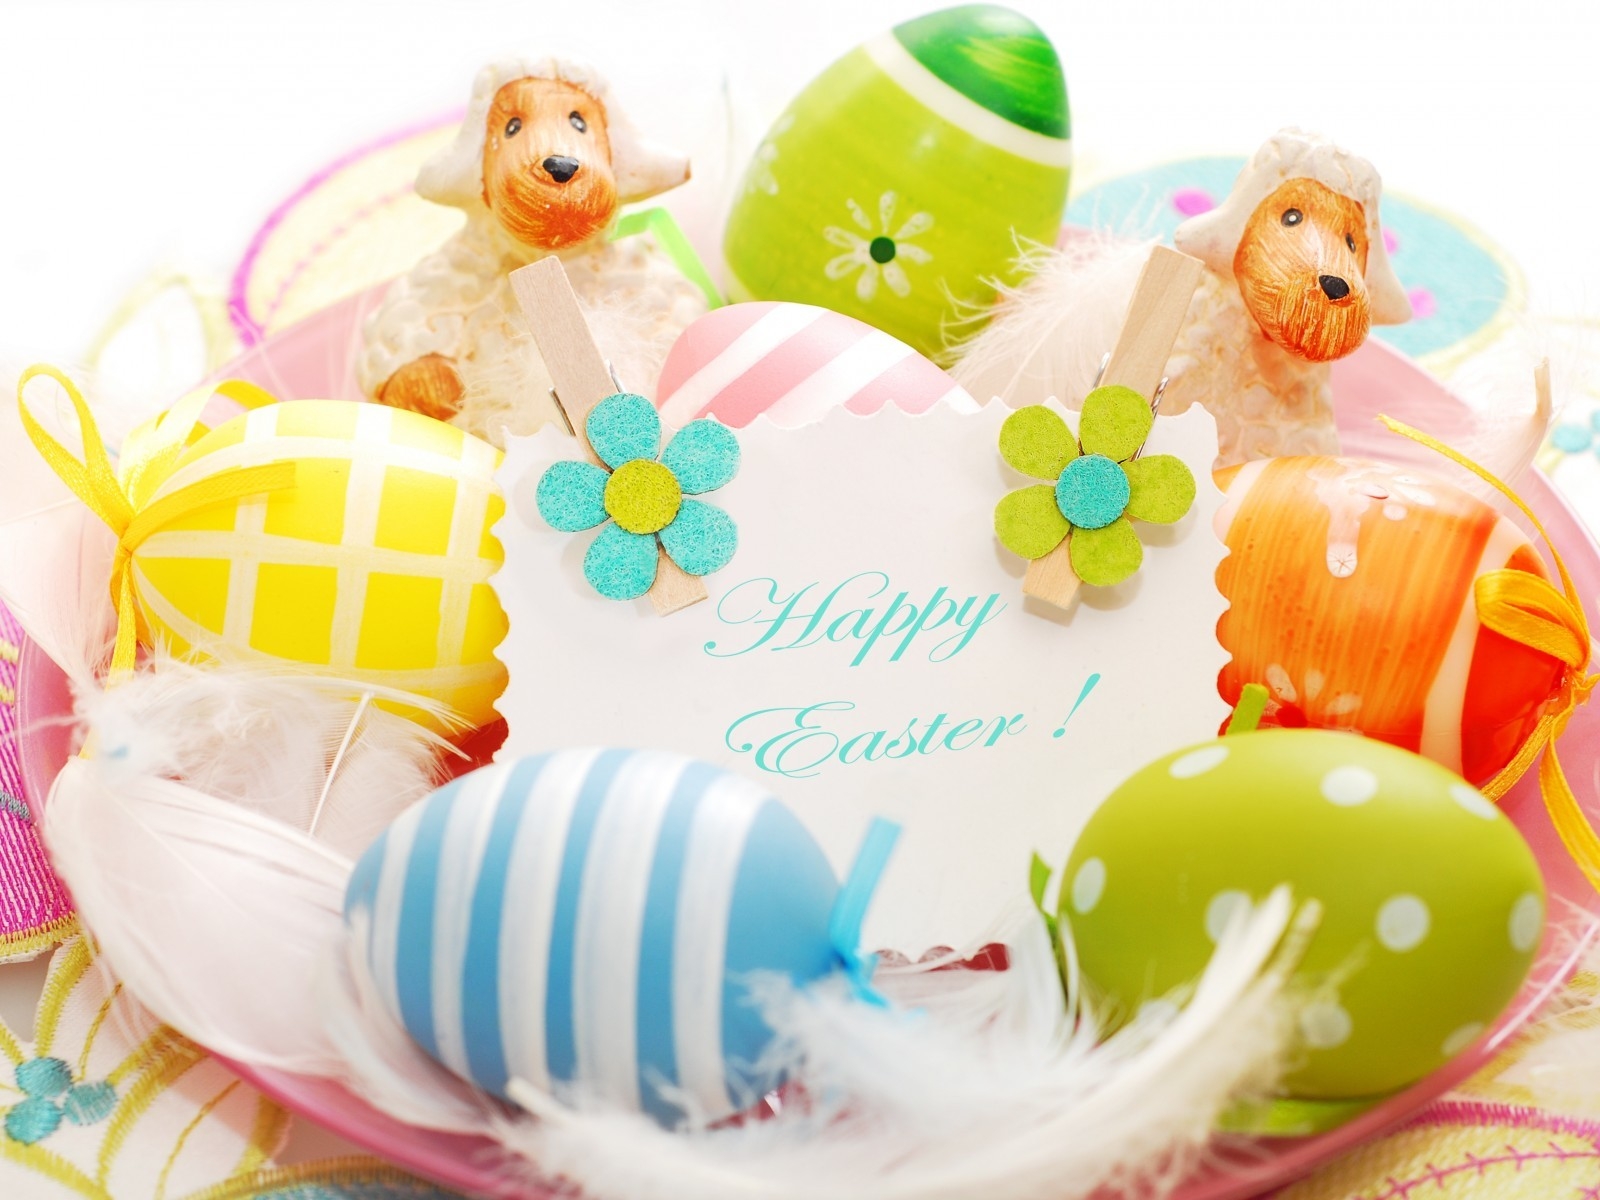 2014 Happy Easter Decorations for 1600 x 1200 resolution